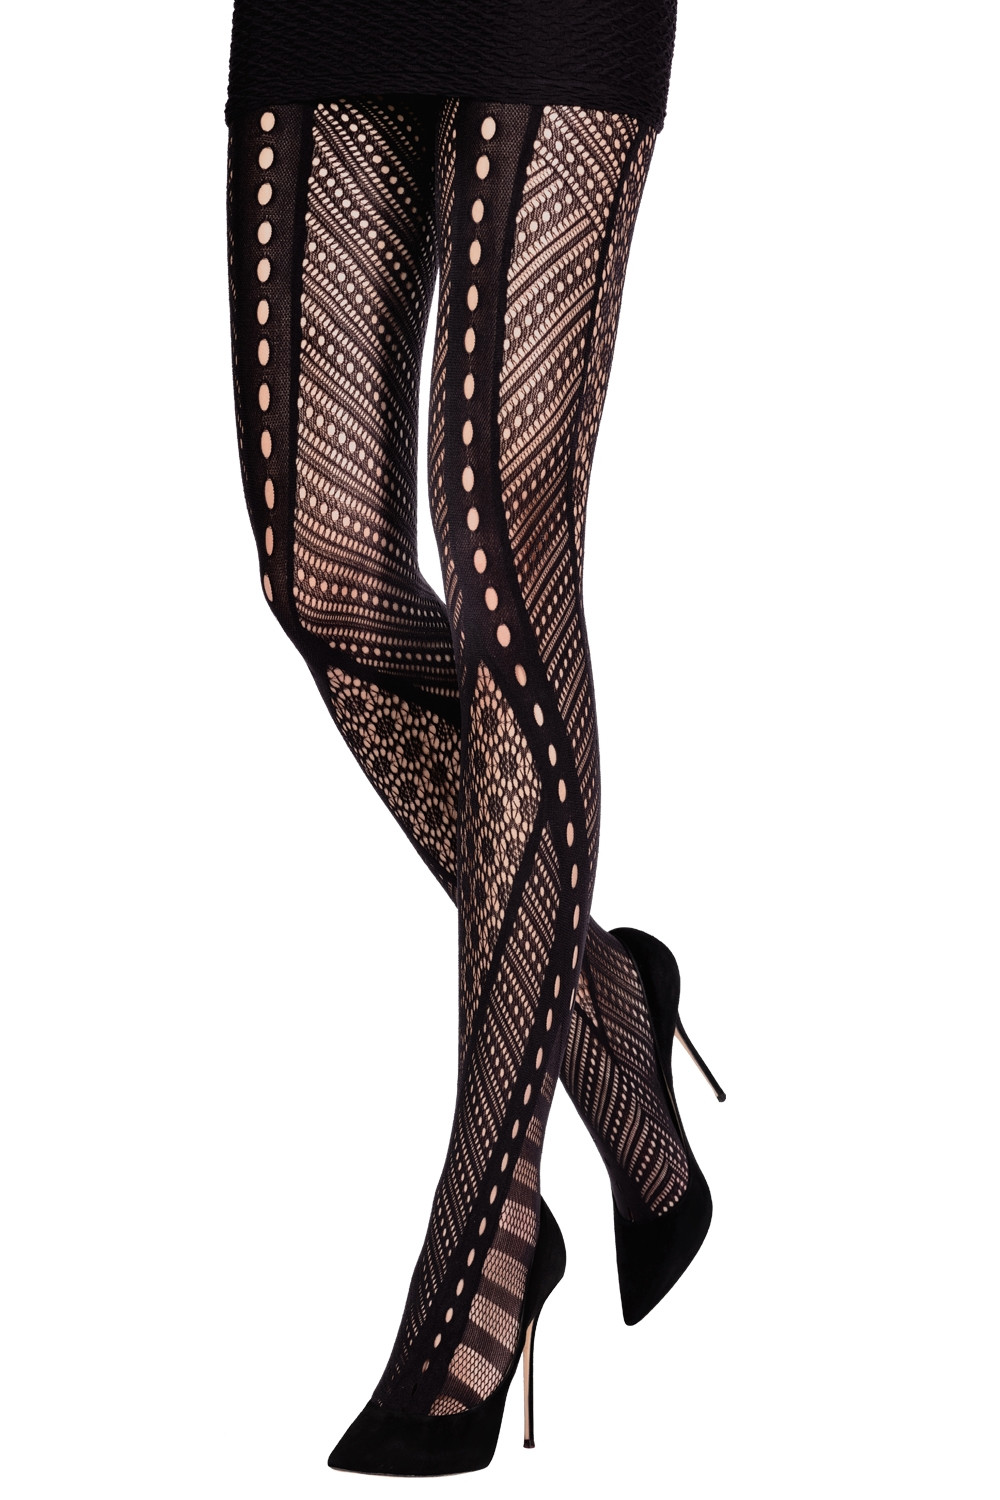 ENGINEERED LACE TIGHTS